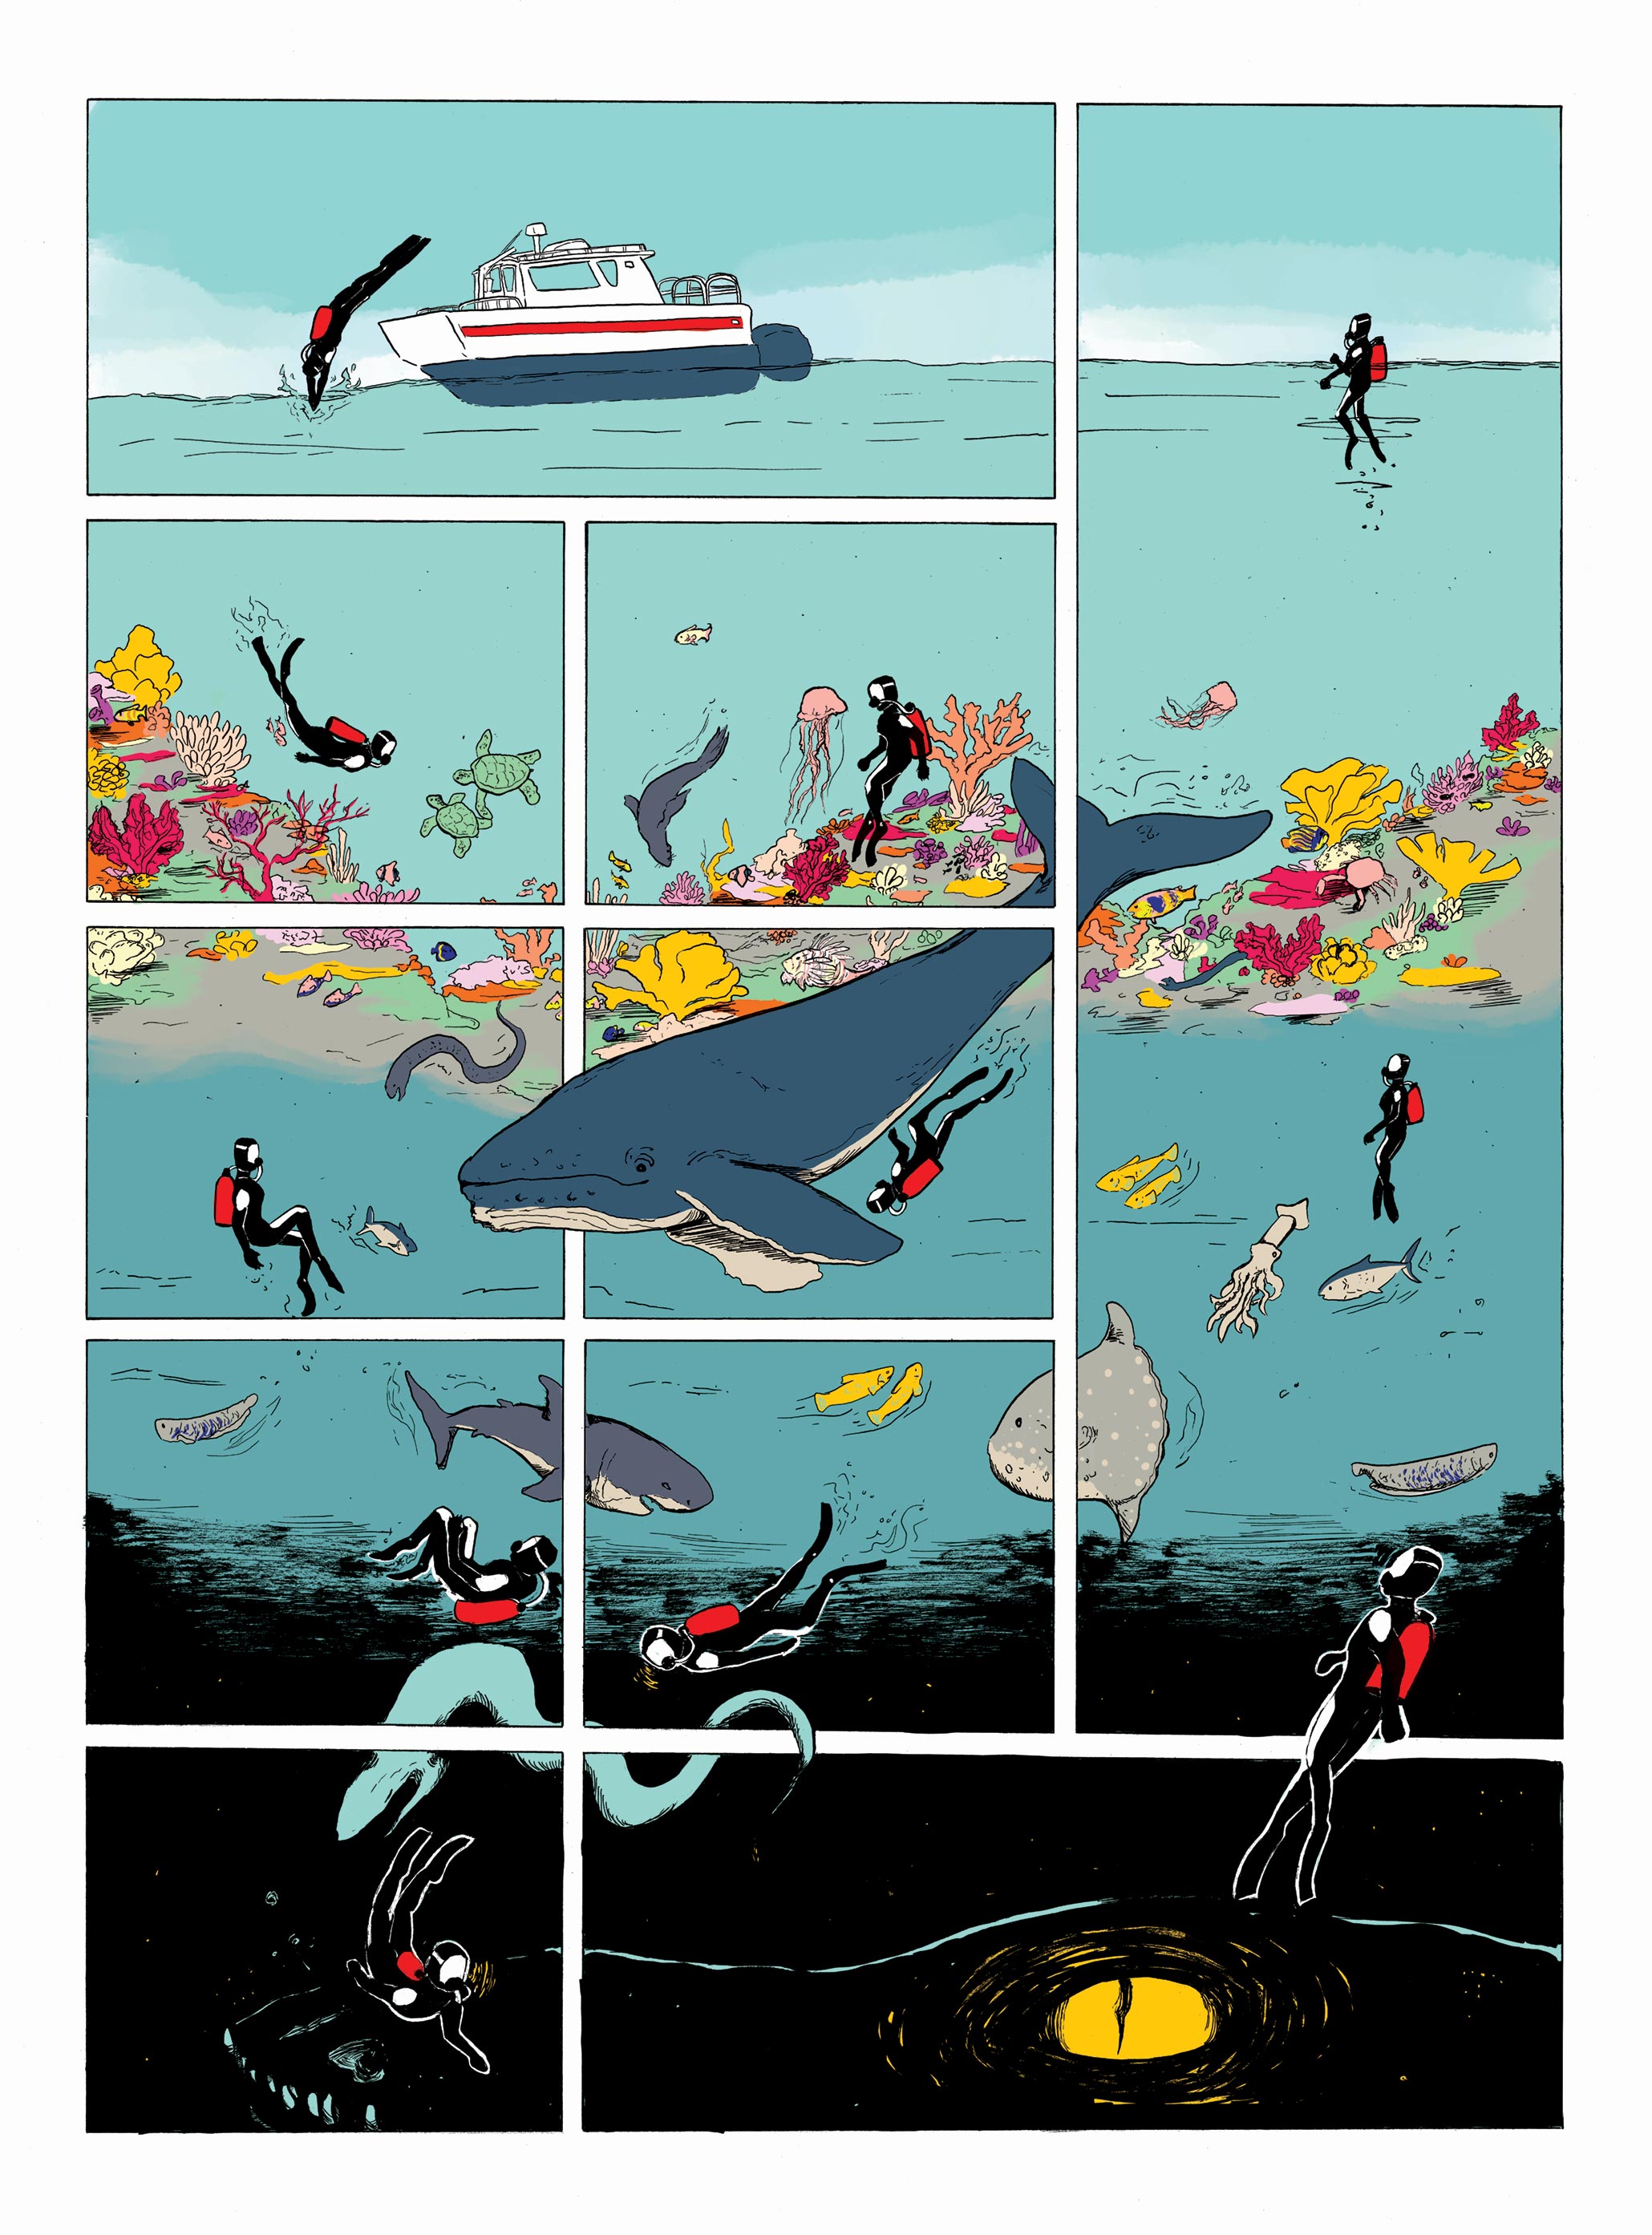 Sunday comic about ocean life by Amanda Schroeder.